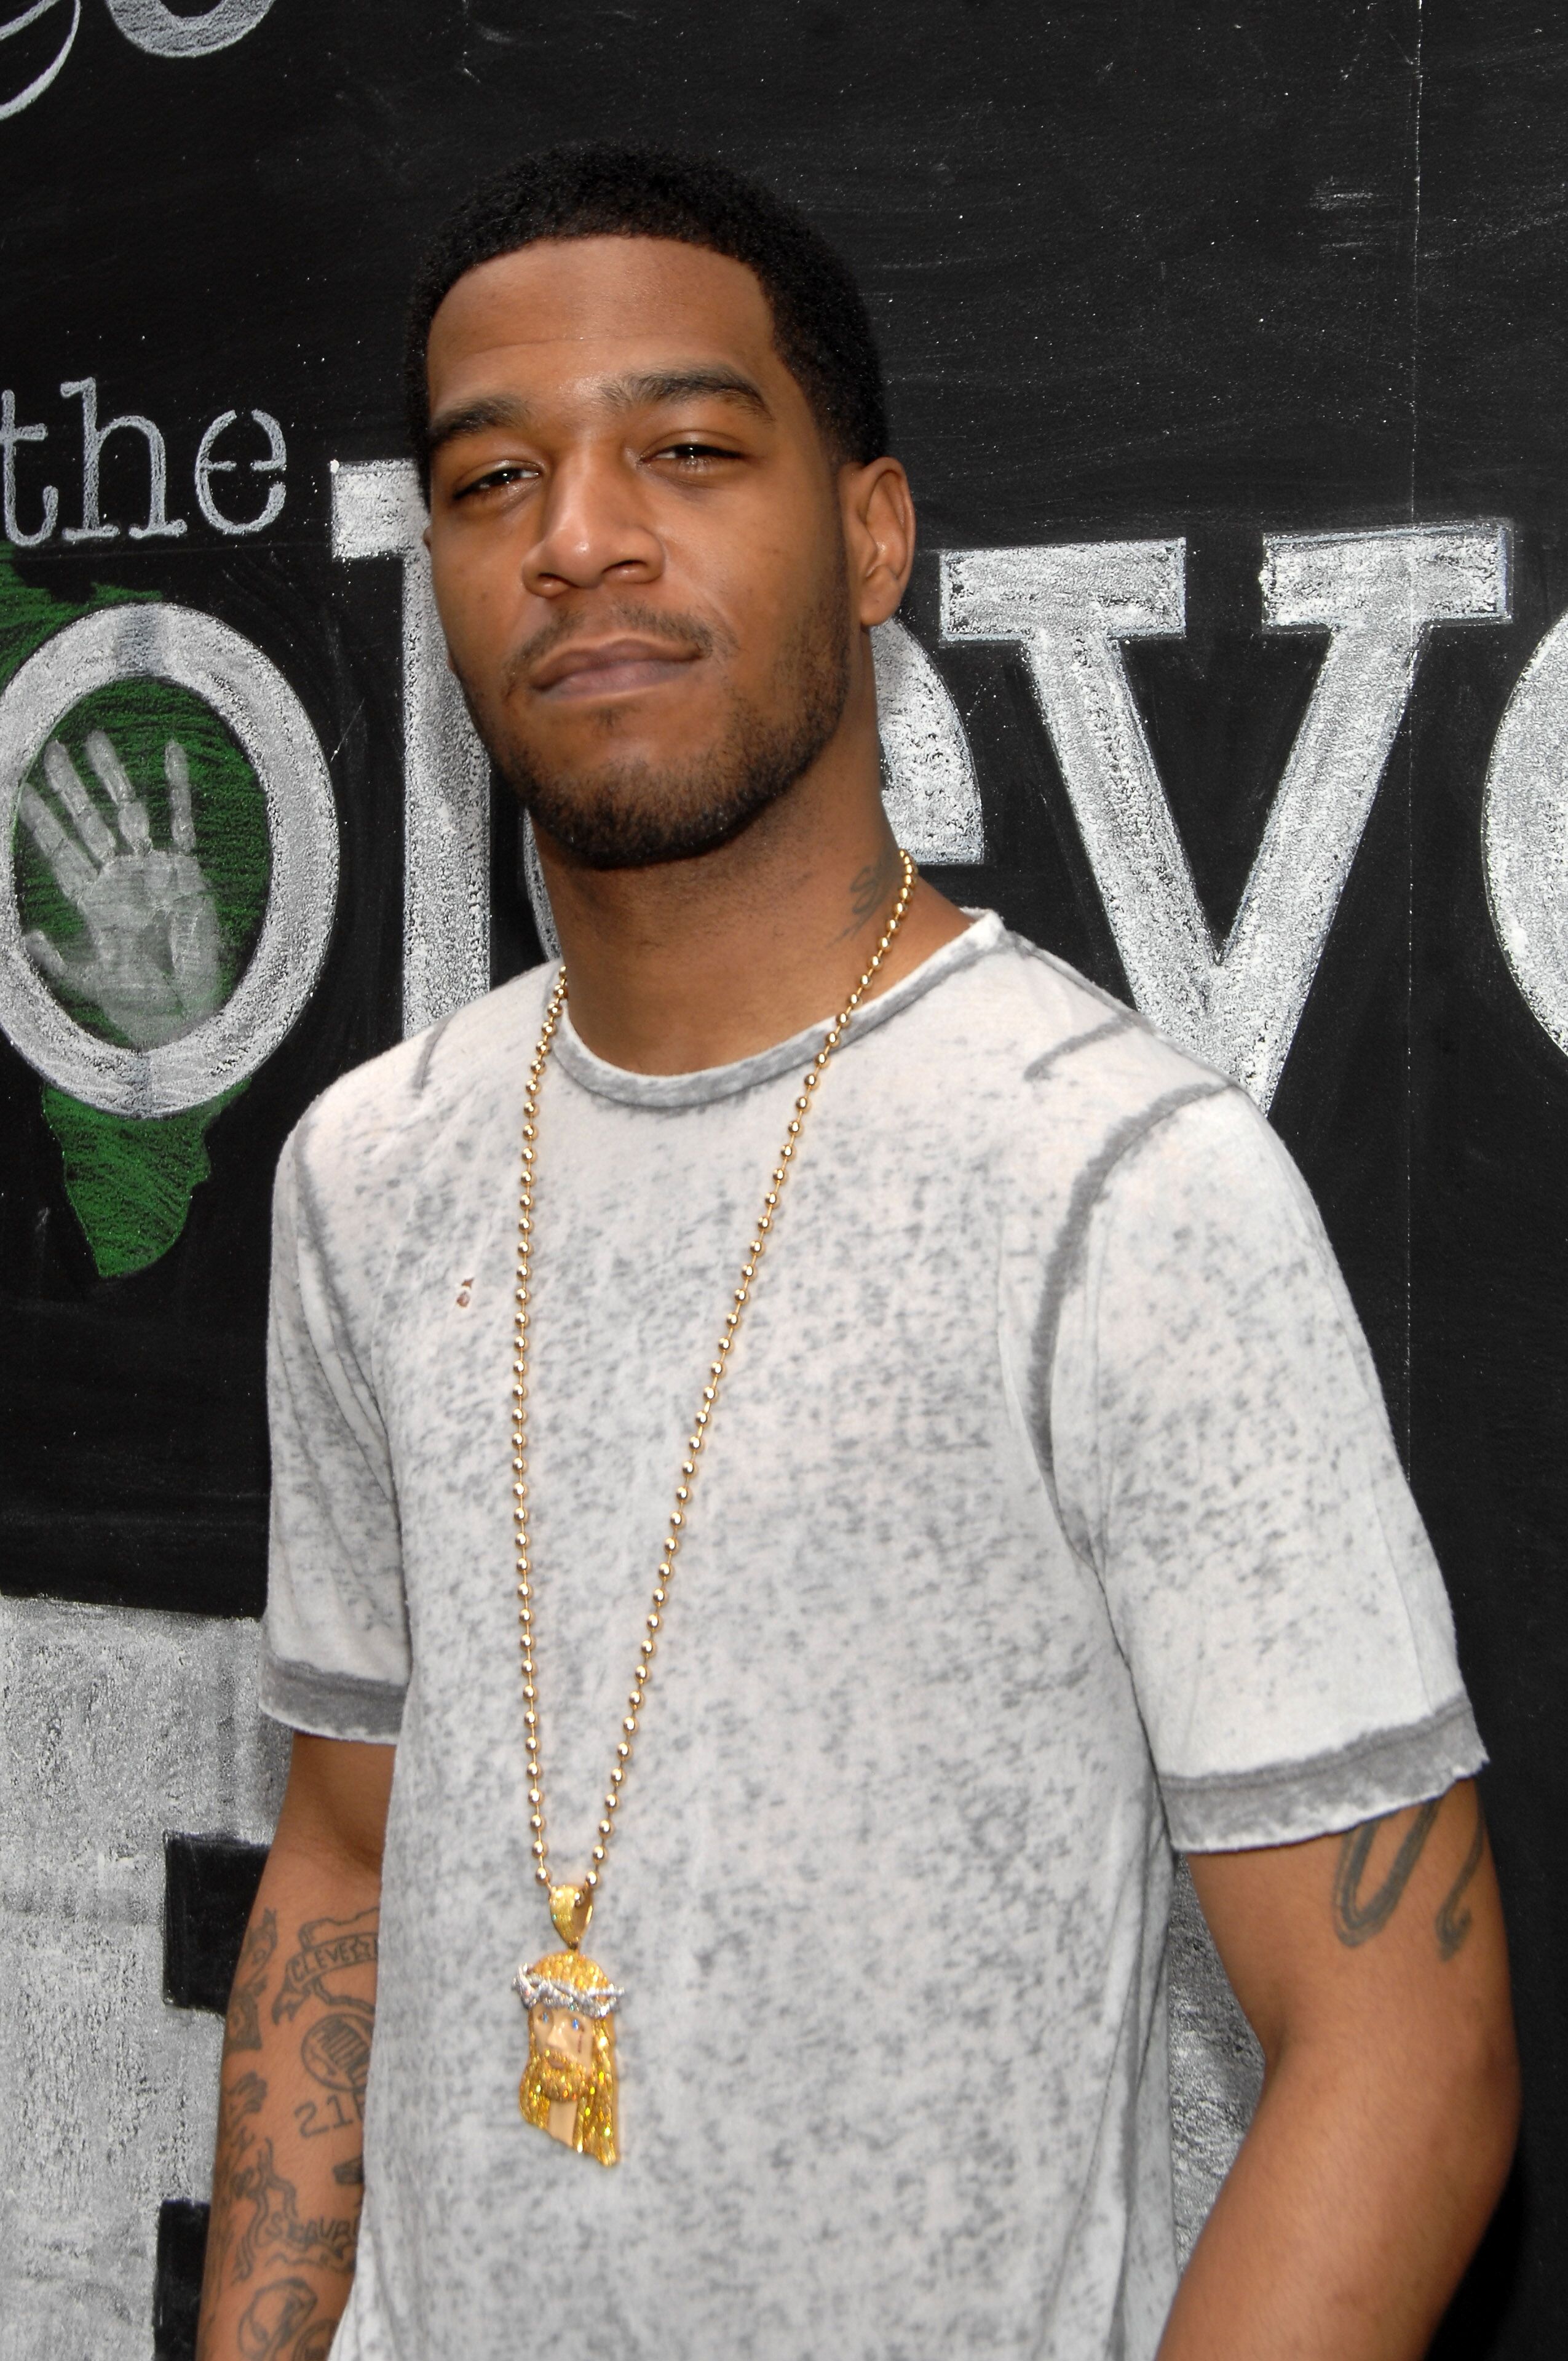 Actor and rapper Kid Cudi/ Source: Getty Images